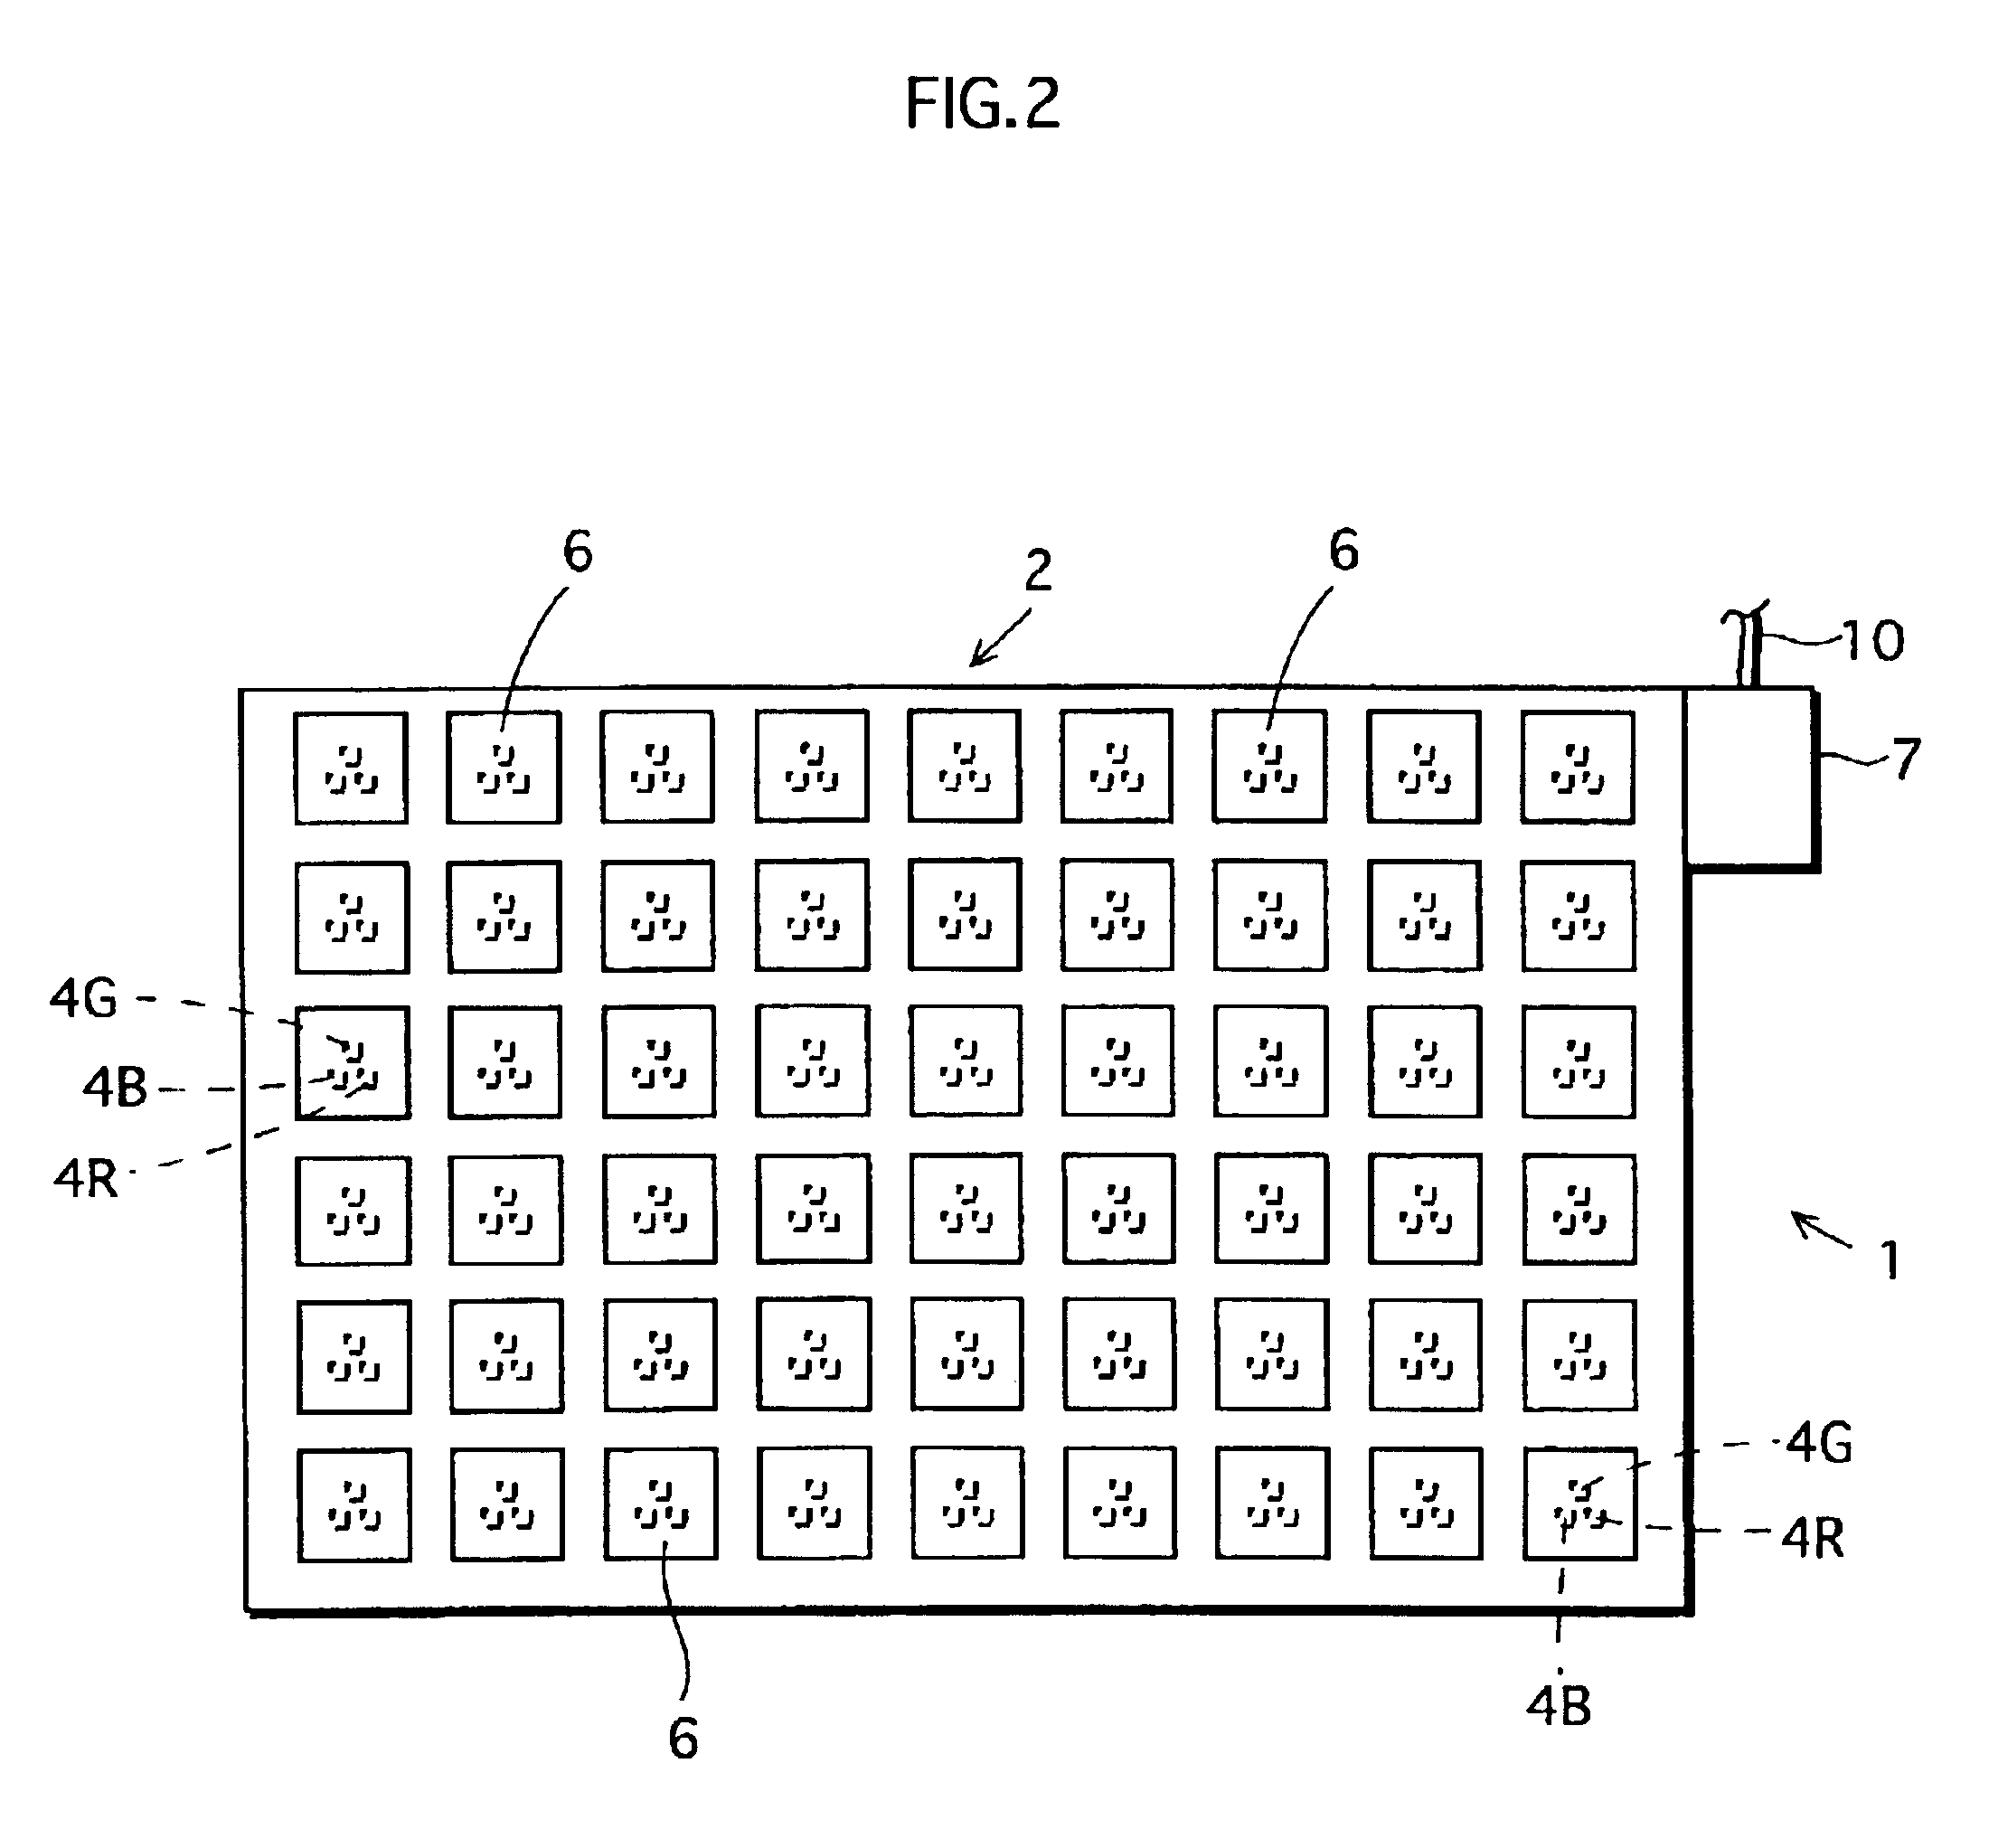 Lighting apparatus with enhanced capability of heat dissipation